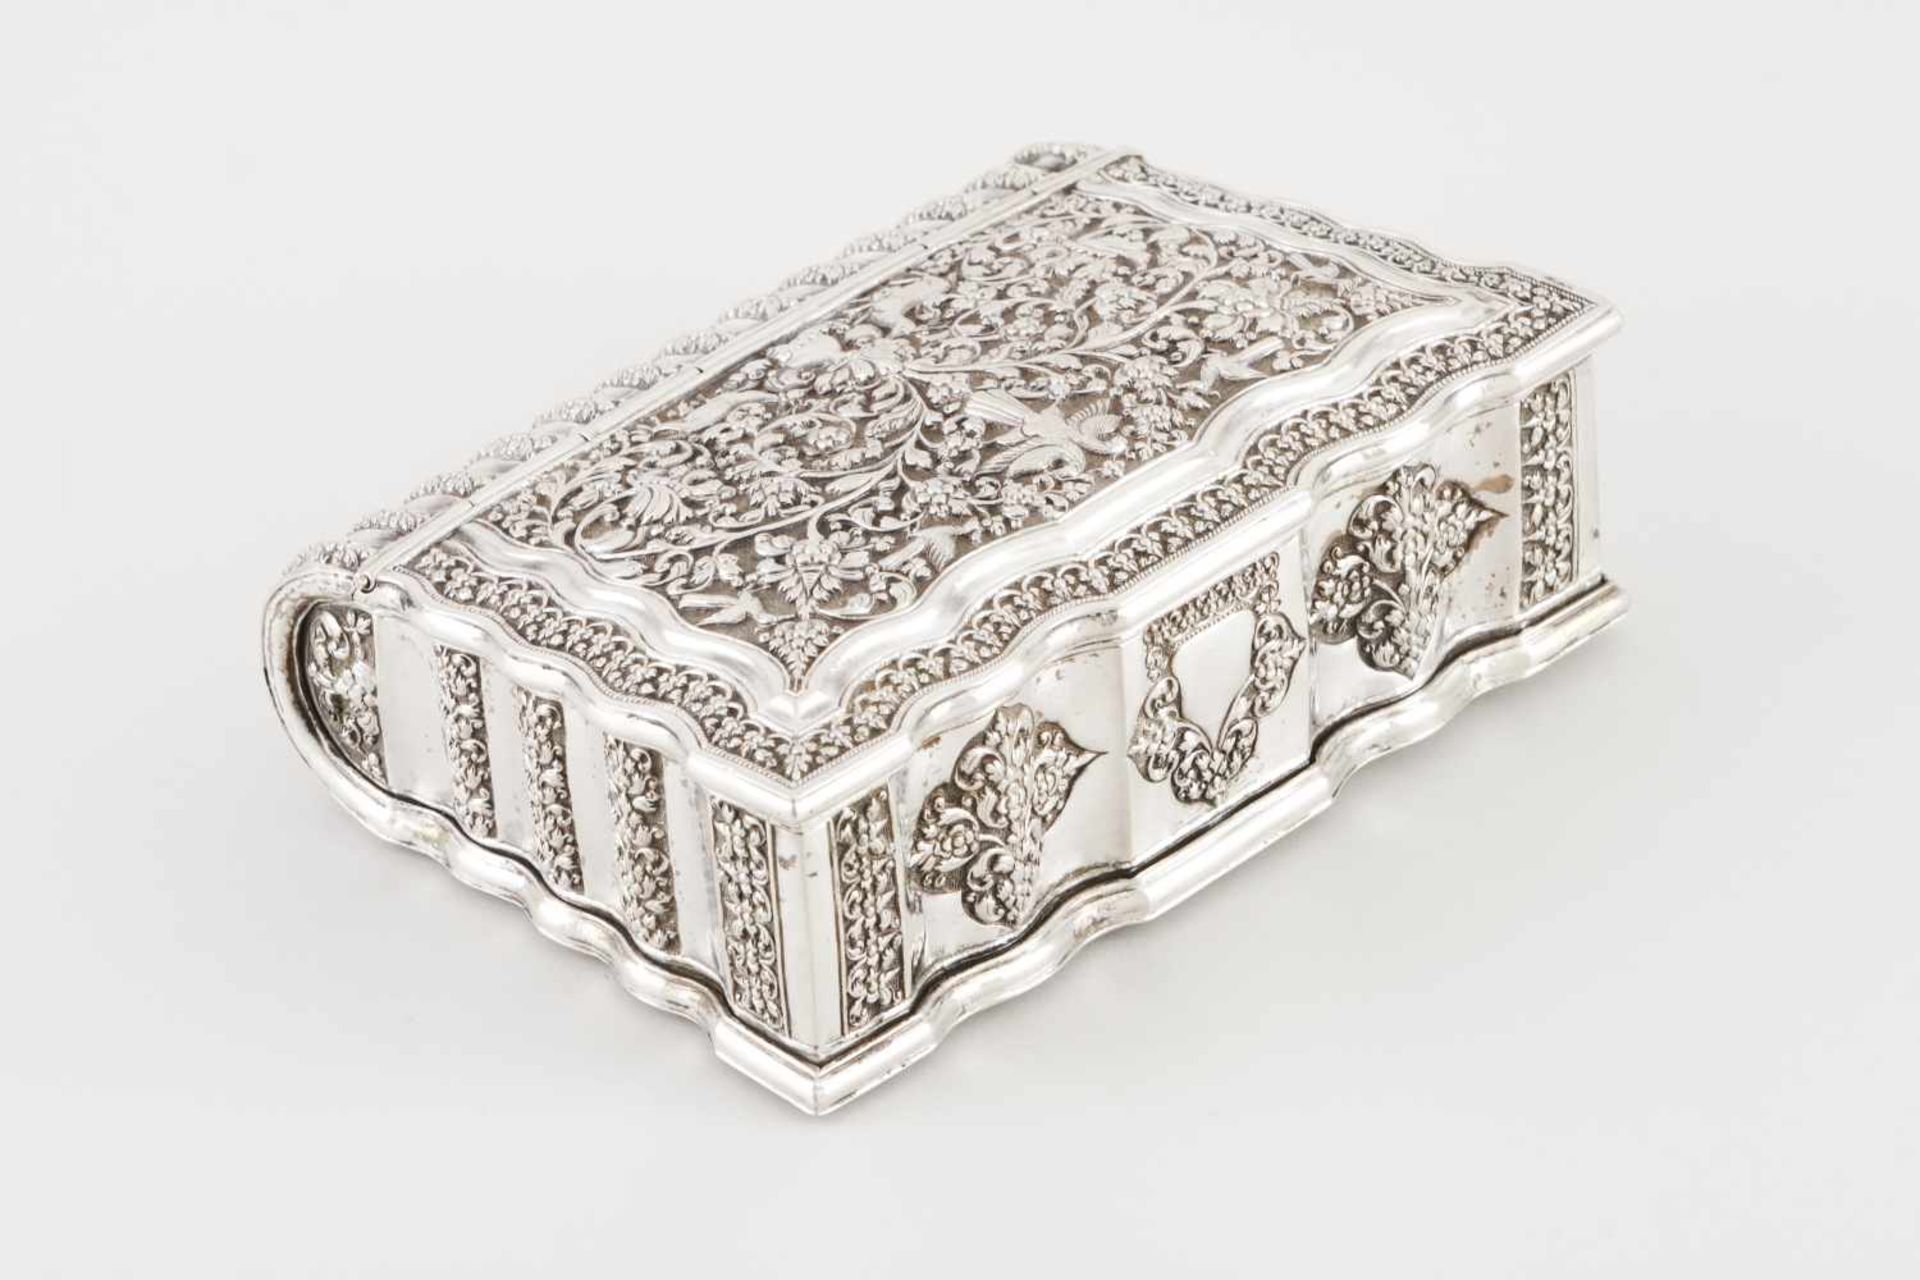 A boxIndian silverBook shaped with hinged cover profusely decorated with floral and foliage